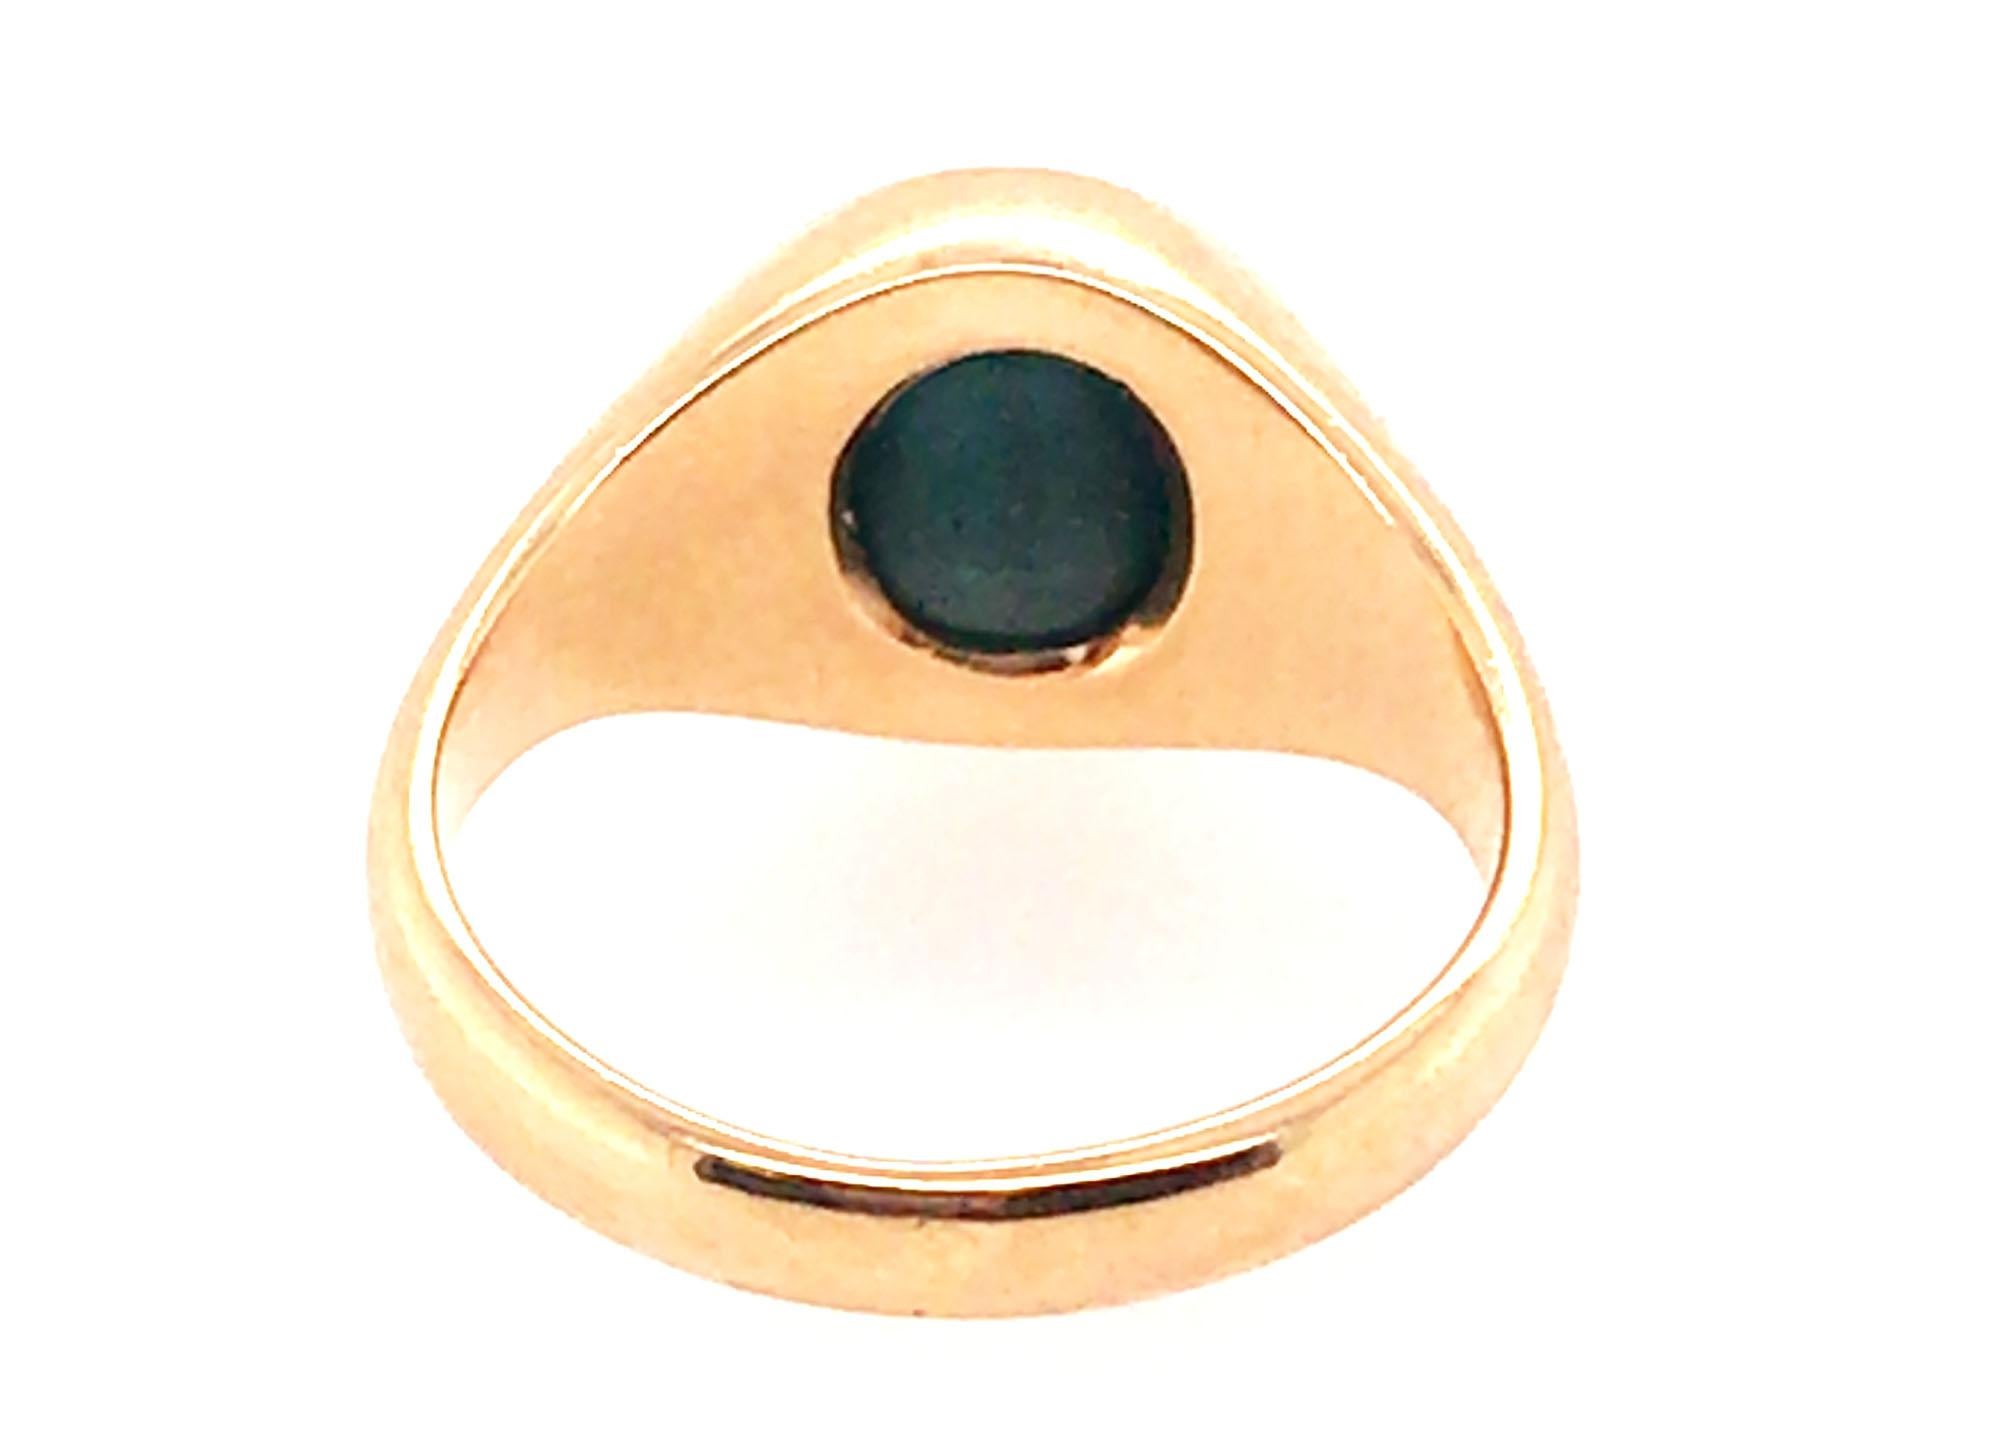 Deco Cat's Eye Ring GIA Blue Green Tourmaline Oval Cabochon Original 1940s 14k In Excellent Condition For Sale In Dearborn, MI